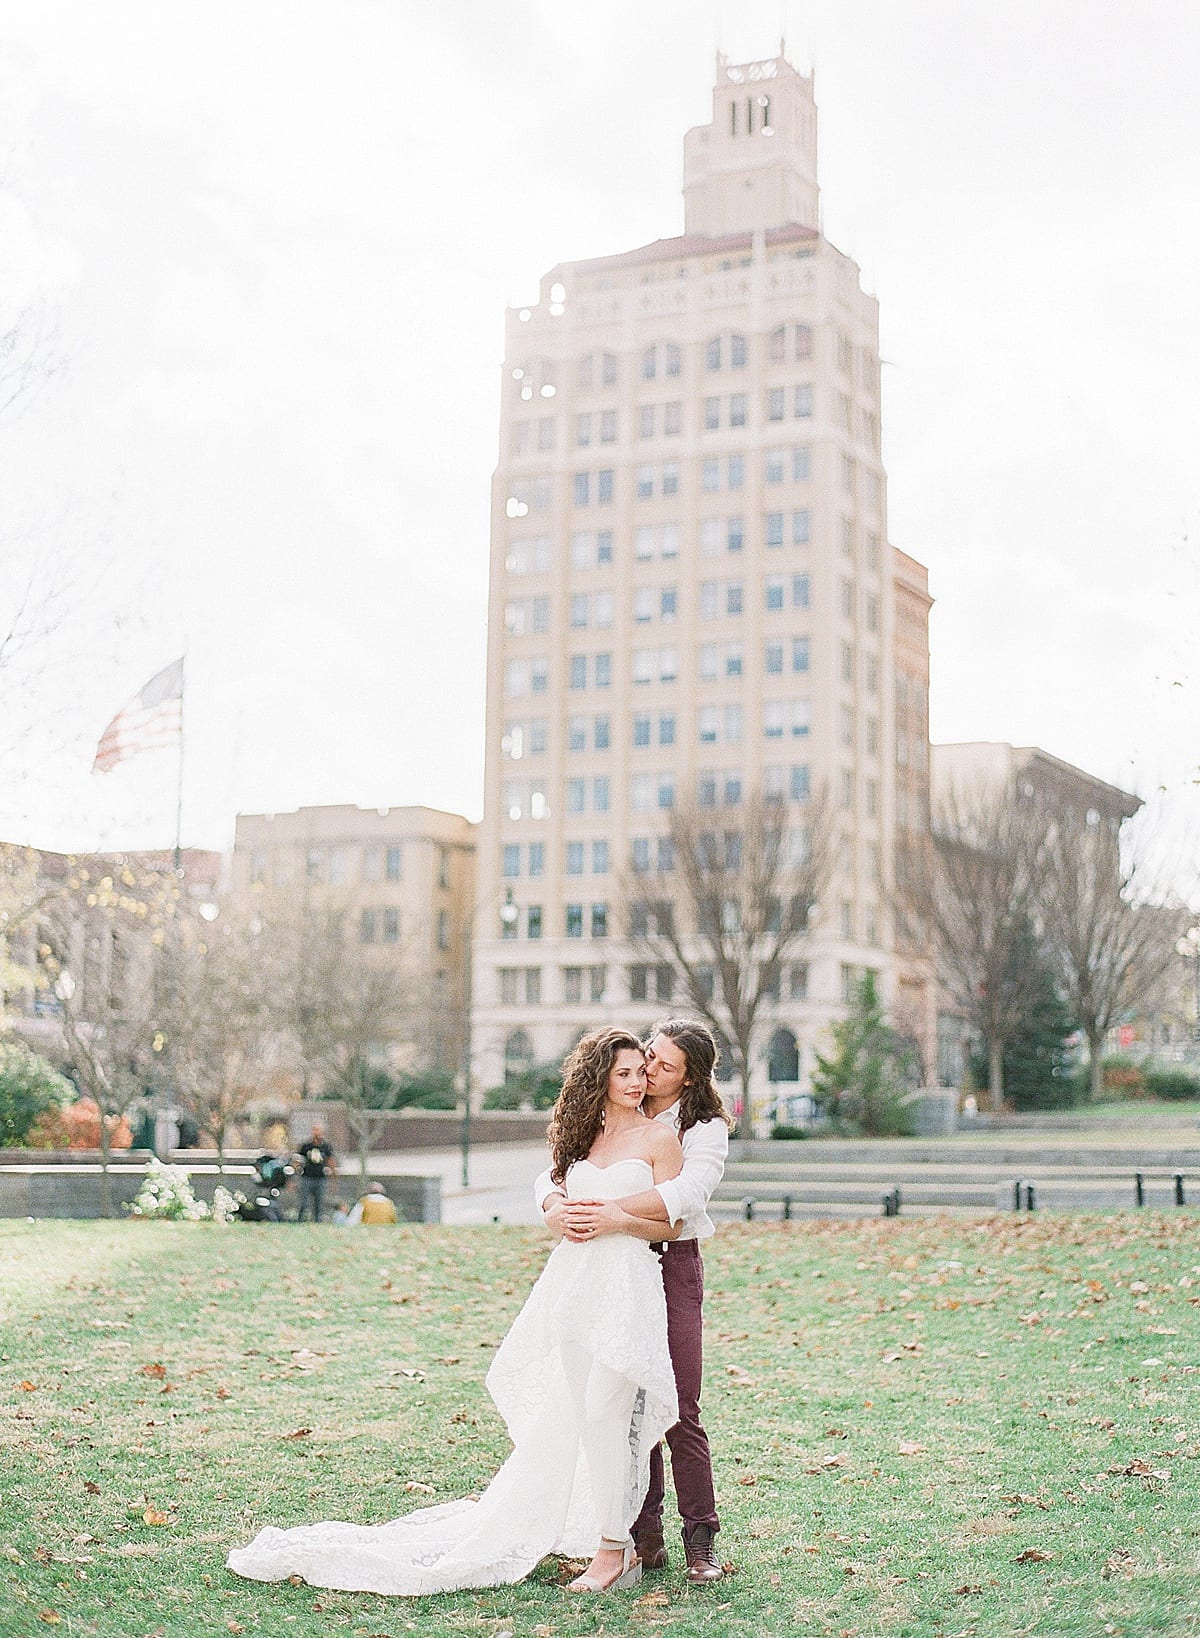 Asheville Elopement Bride and Groom Snuggling in Park Photo